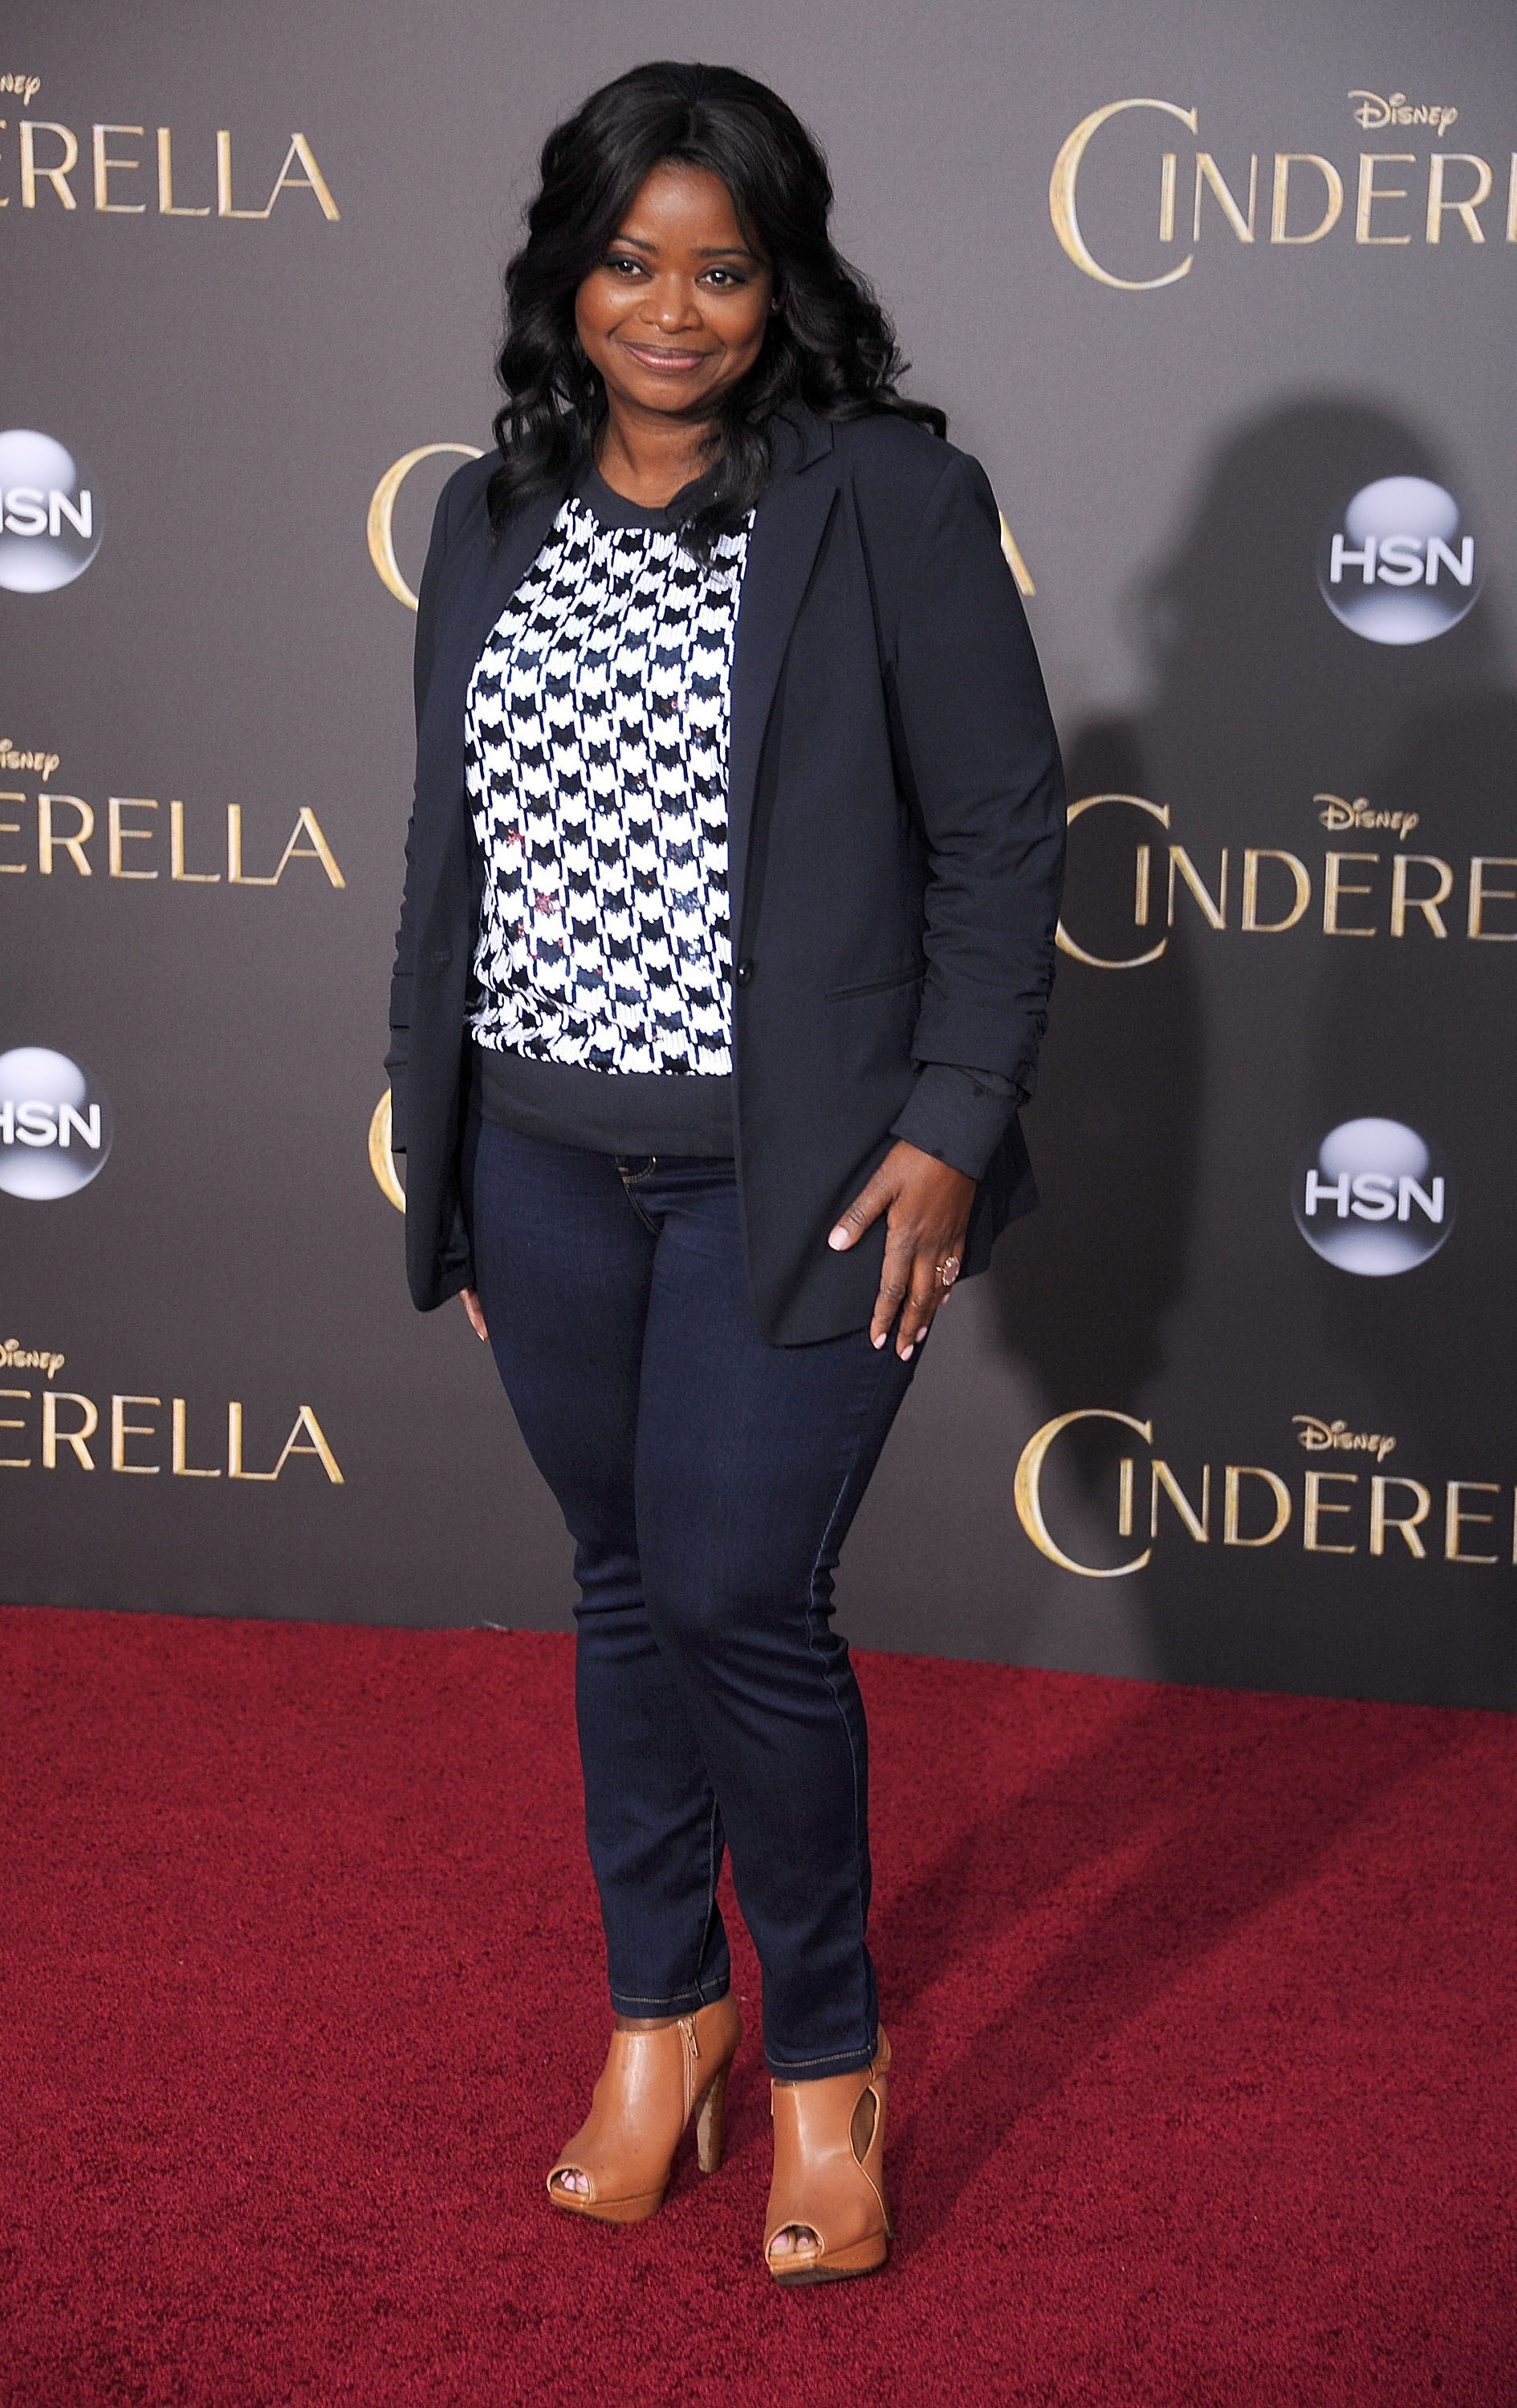 Octavia Spencer arrives at the World Premiere of Disney's "Cinderella" at the El Capitan Theatre on March 1, 2015 in Hollywood. (Gregg DeGuire—Getty Images)